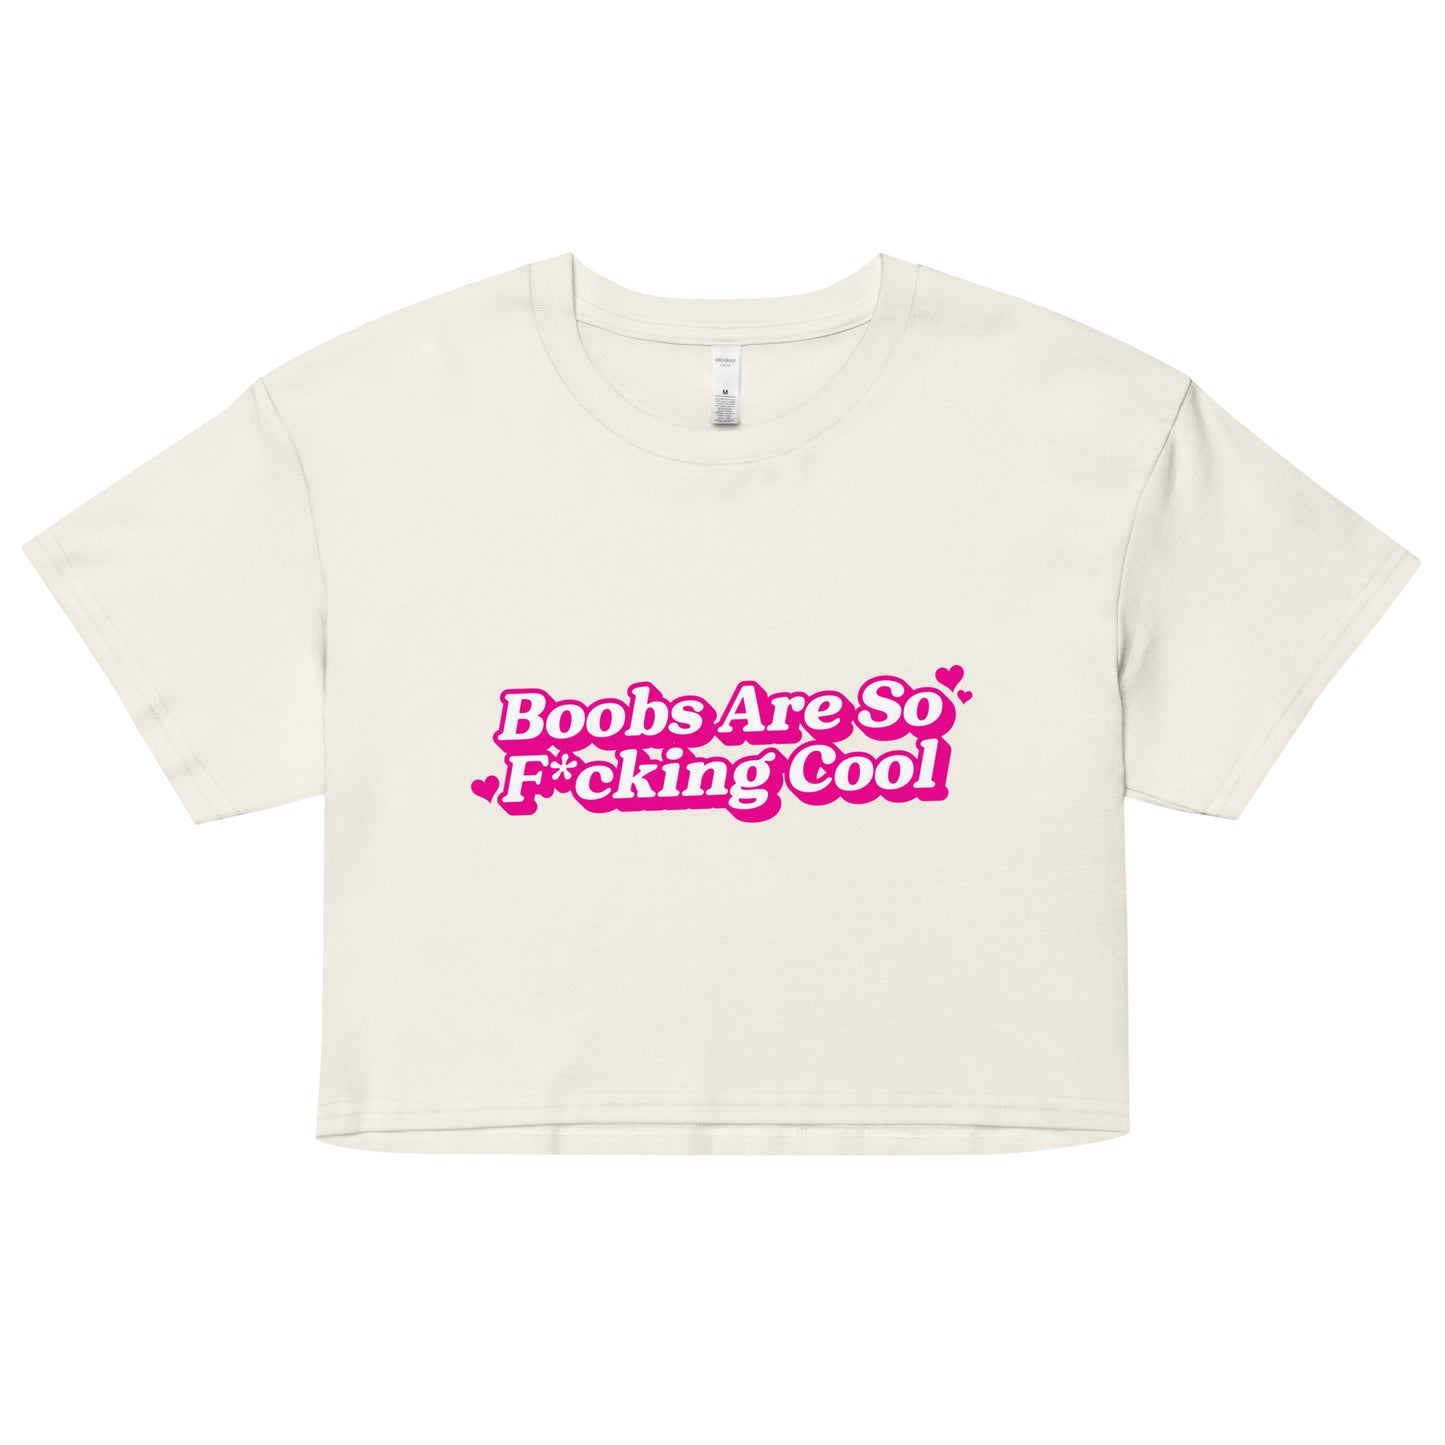 Boobs Are F*cking Cool (Pink) Women’s crop top